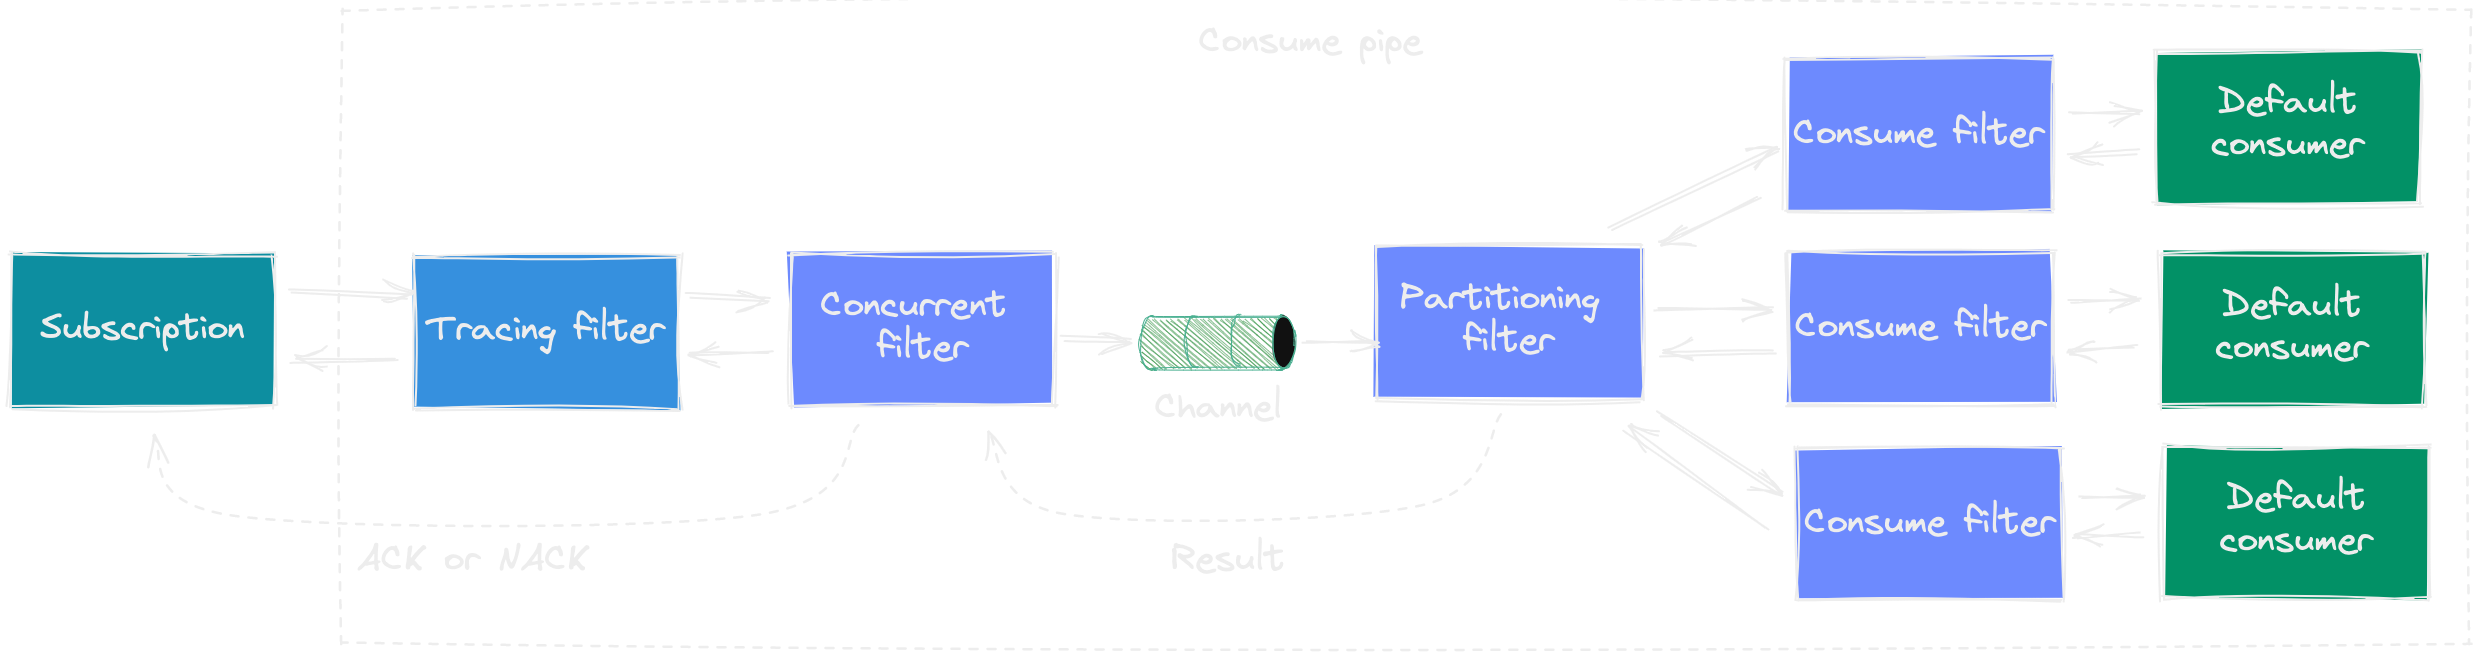 Pipe with concurrent and partitioning filters